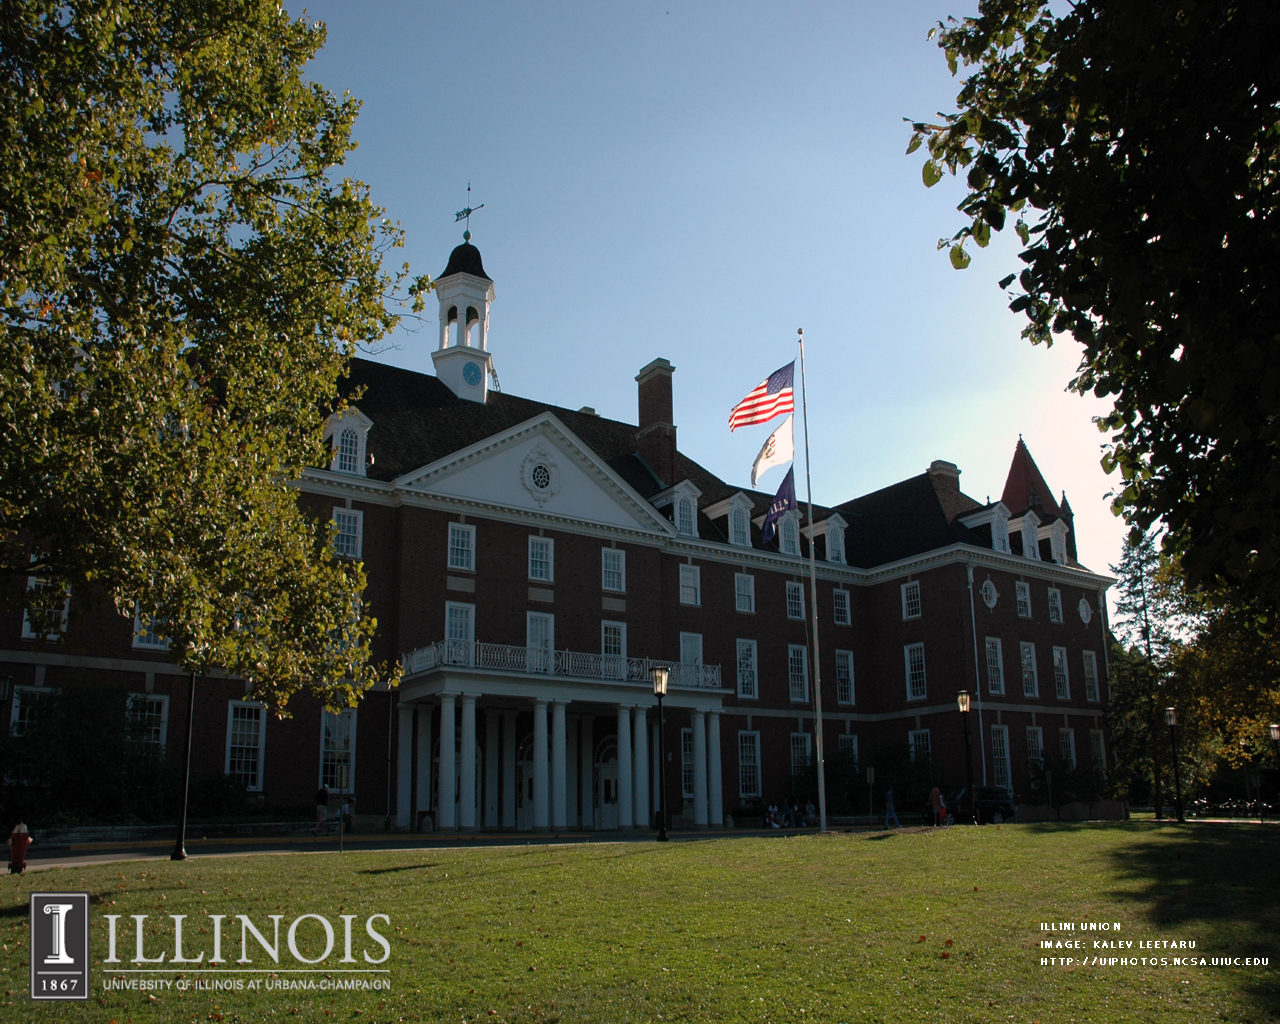 Project A Photographic Record Of The University Illinois